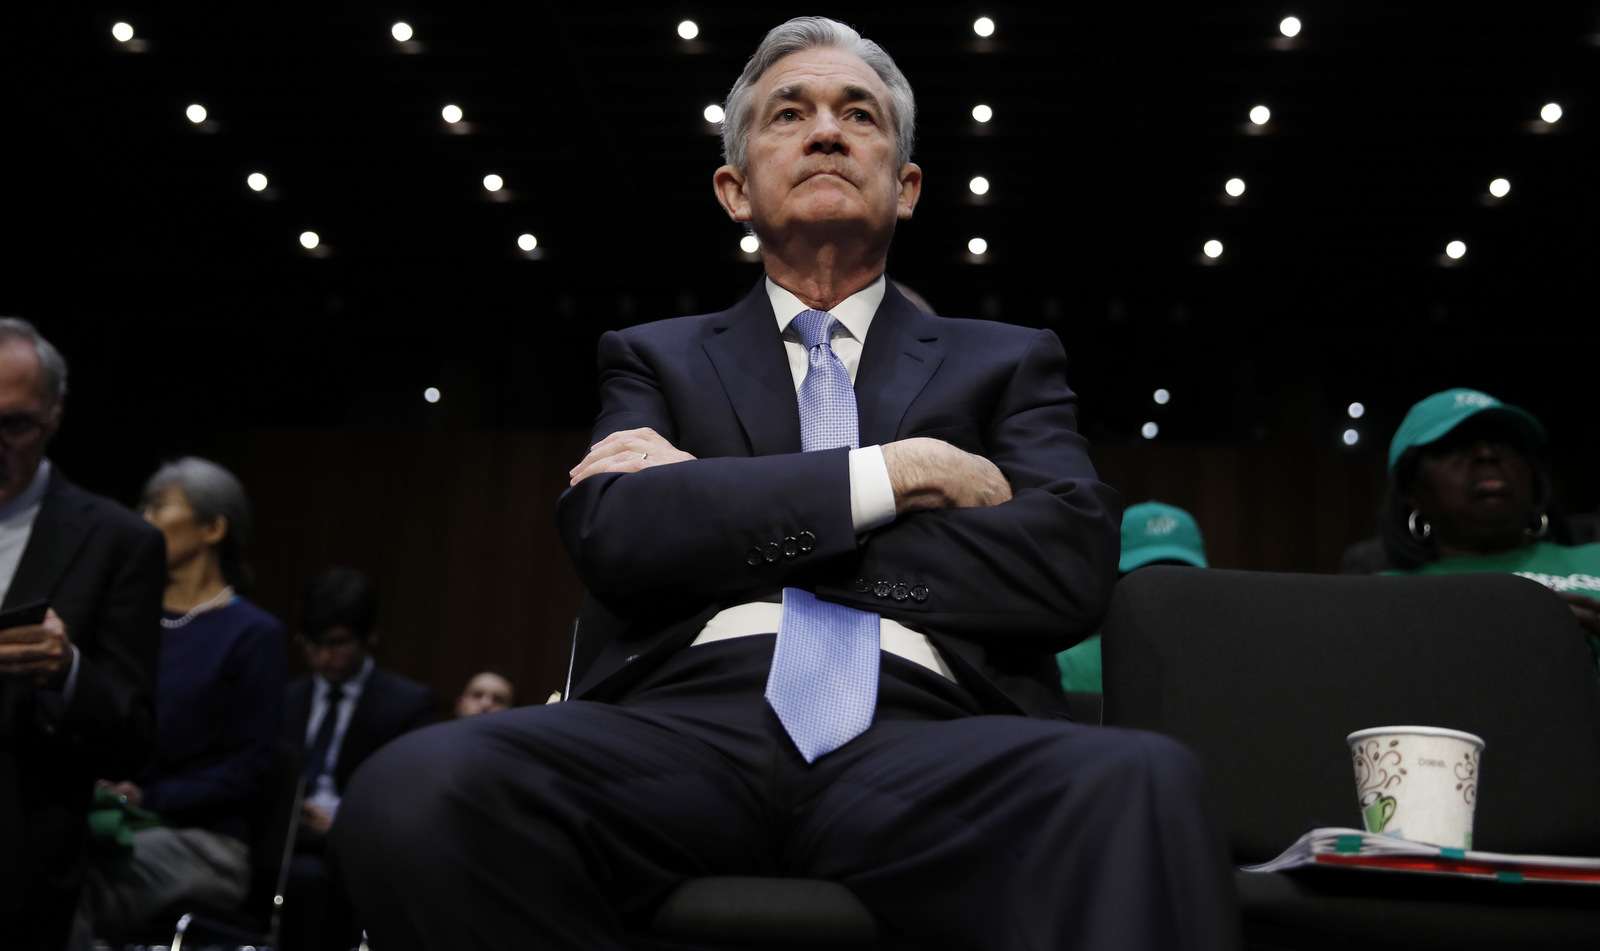 Jerome Powell, President Donald Trump's nominee for chairman of the Federal Reserve, sits in the audience before being called to testify during a Senate Banking, Housing, and Urban Affairs Committee confirmation hearing on Capitol Hill, Nov. 28, 2017.  (AP/Carolyn Kaster)